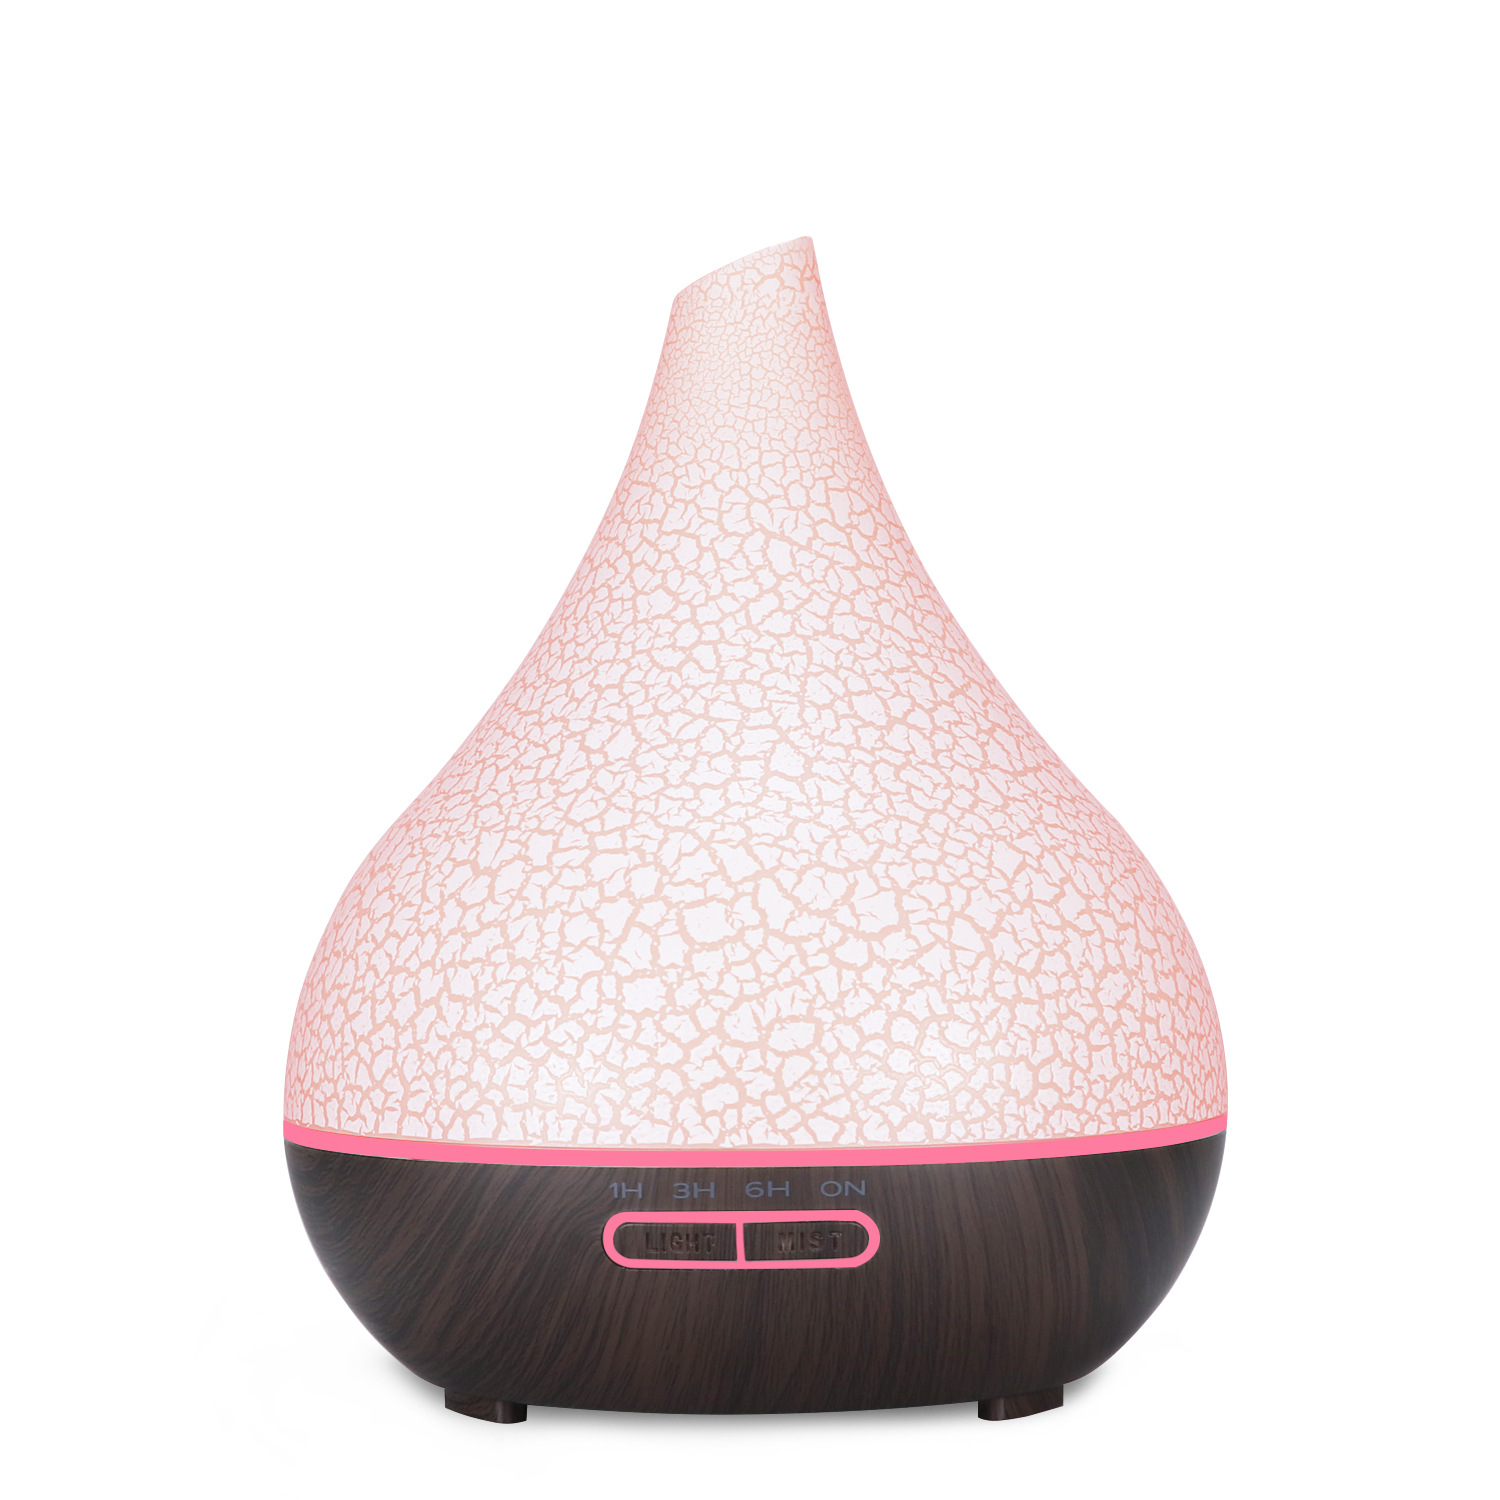 Intengo eshibhile yase-China I-Essential Oil Aroma Diffuser Innovative Essential Oil Ultrasonic Humidifier Flame Aroma Diffuser With Night Light